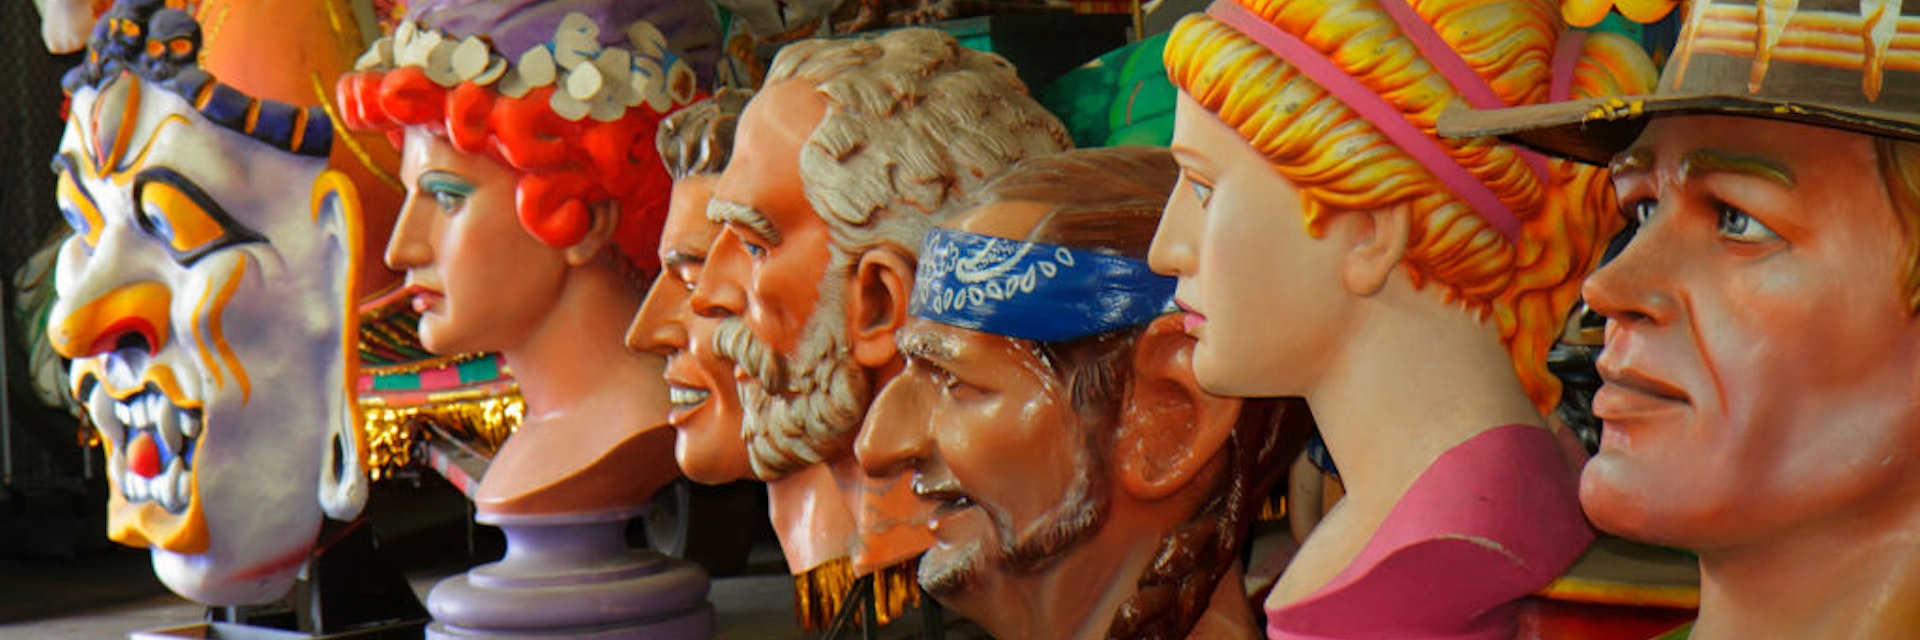 Giant head statues at Mardi Gras World. (Photo by: Jeffrey Greenberg/Universal Images Group via Getty Images)